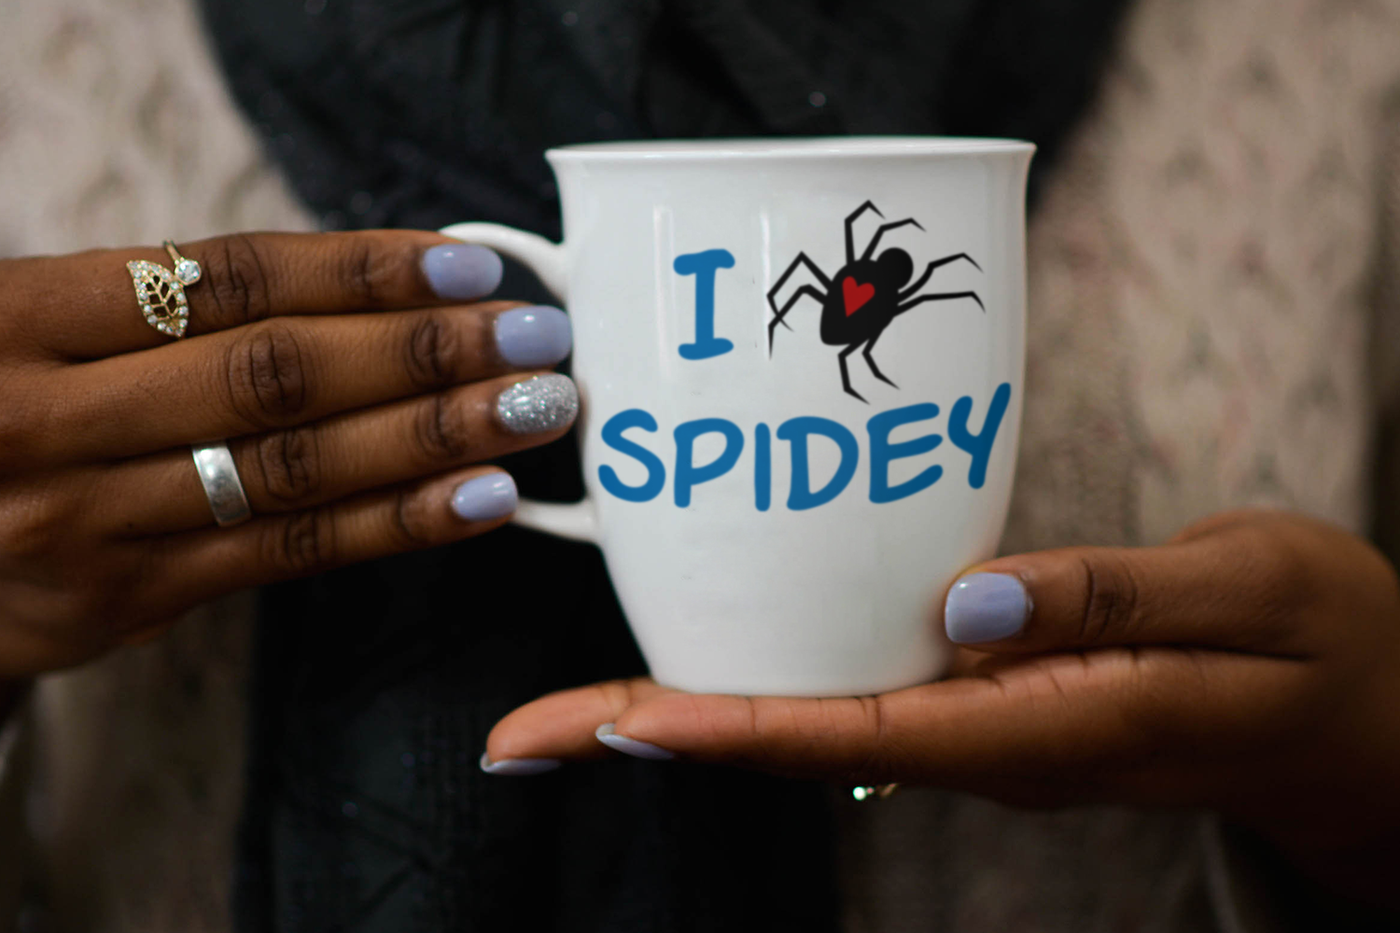 A black woman with lavender nail polish holds a white mug. On the mug, it says "I heart spidey" in comic book style letters. The heart is on the back of a crawling spider design.